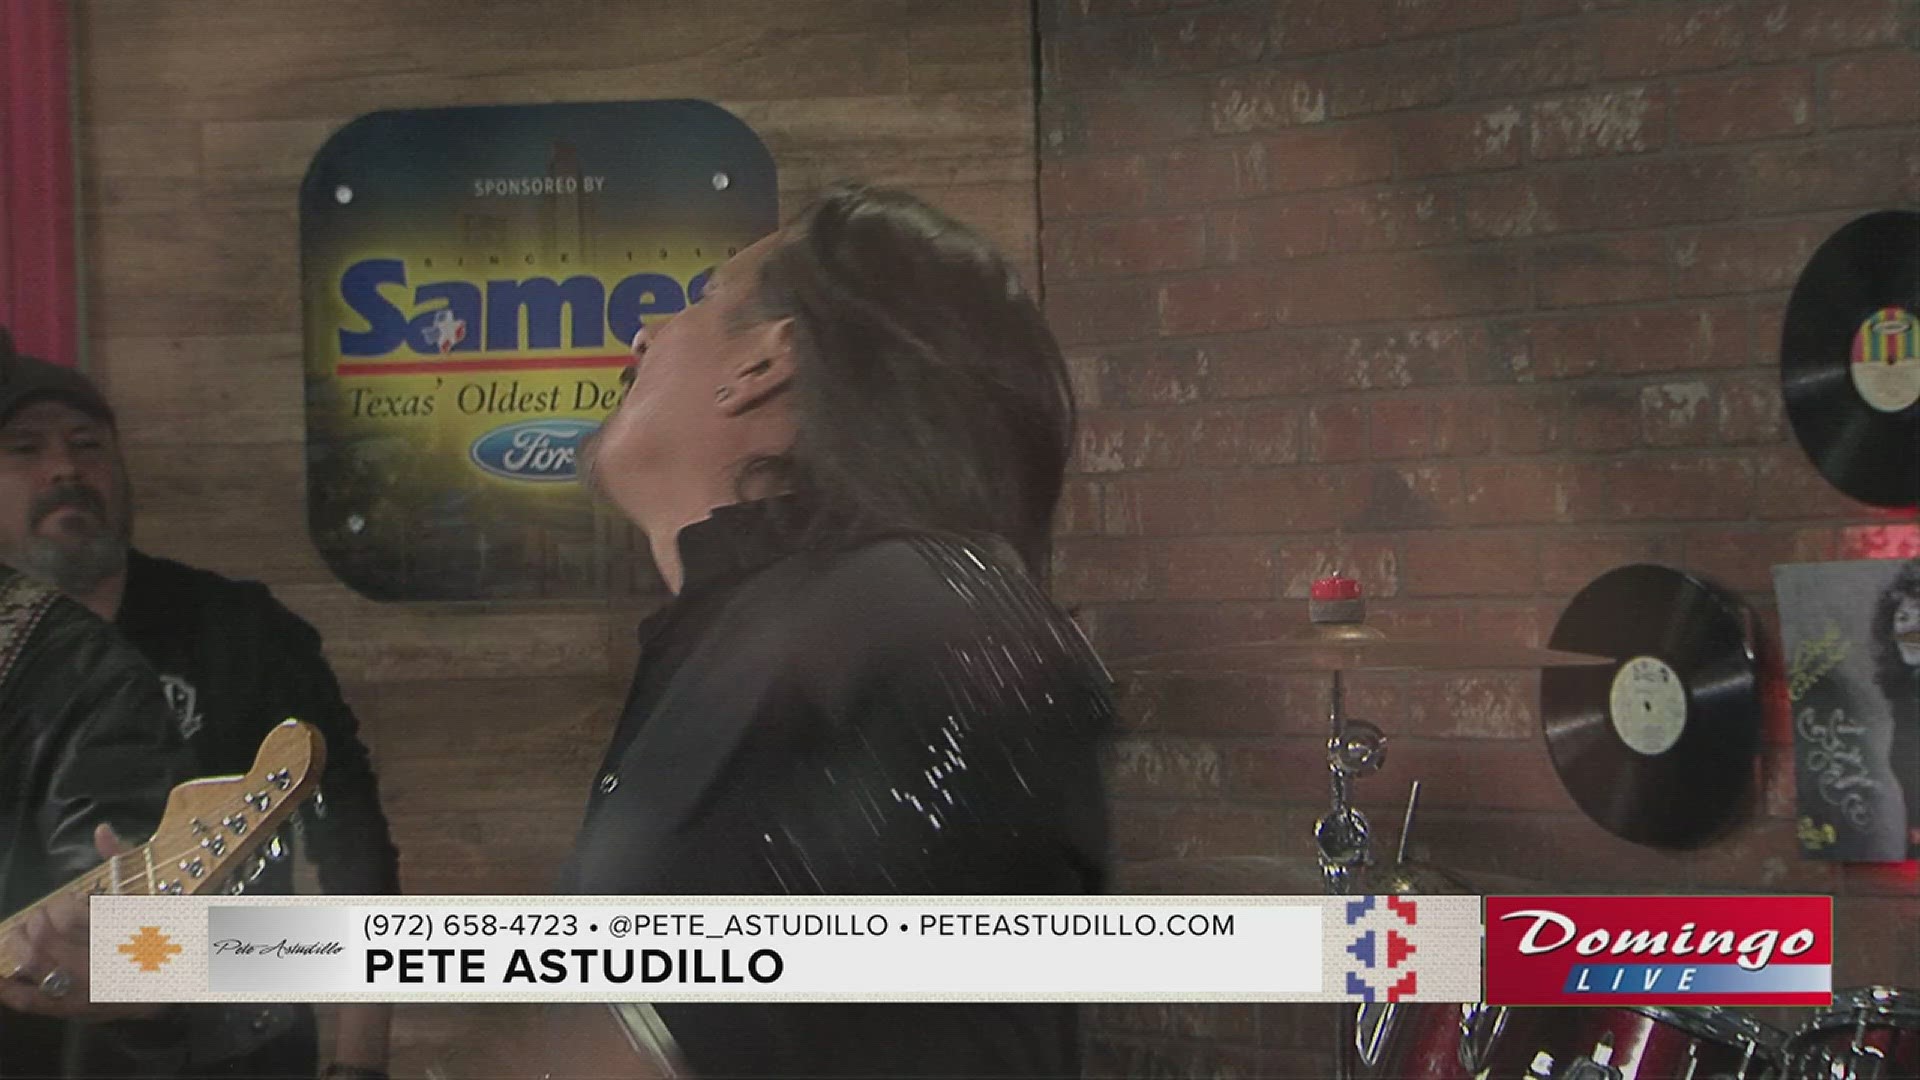 Pete Astudillo joined us on Domingo Live to perform his cover of Luis Miguel's  "Un Hombre Busca Una Mujer."